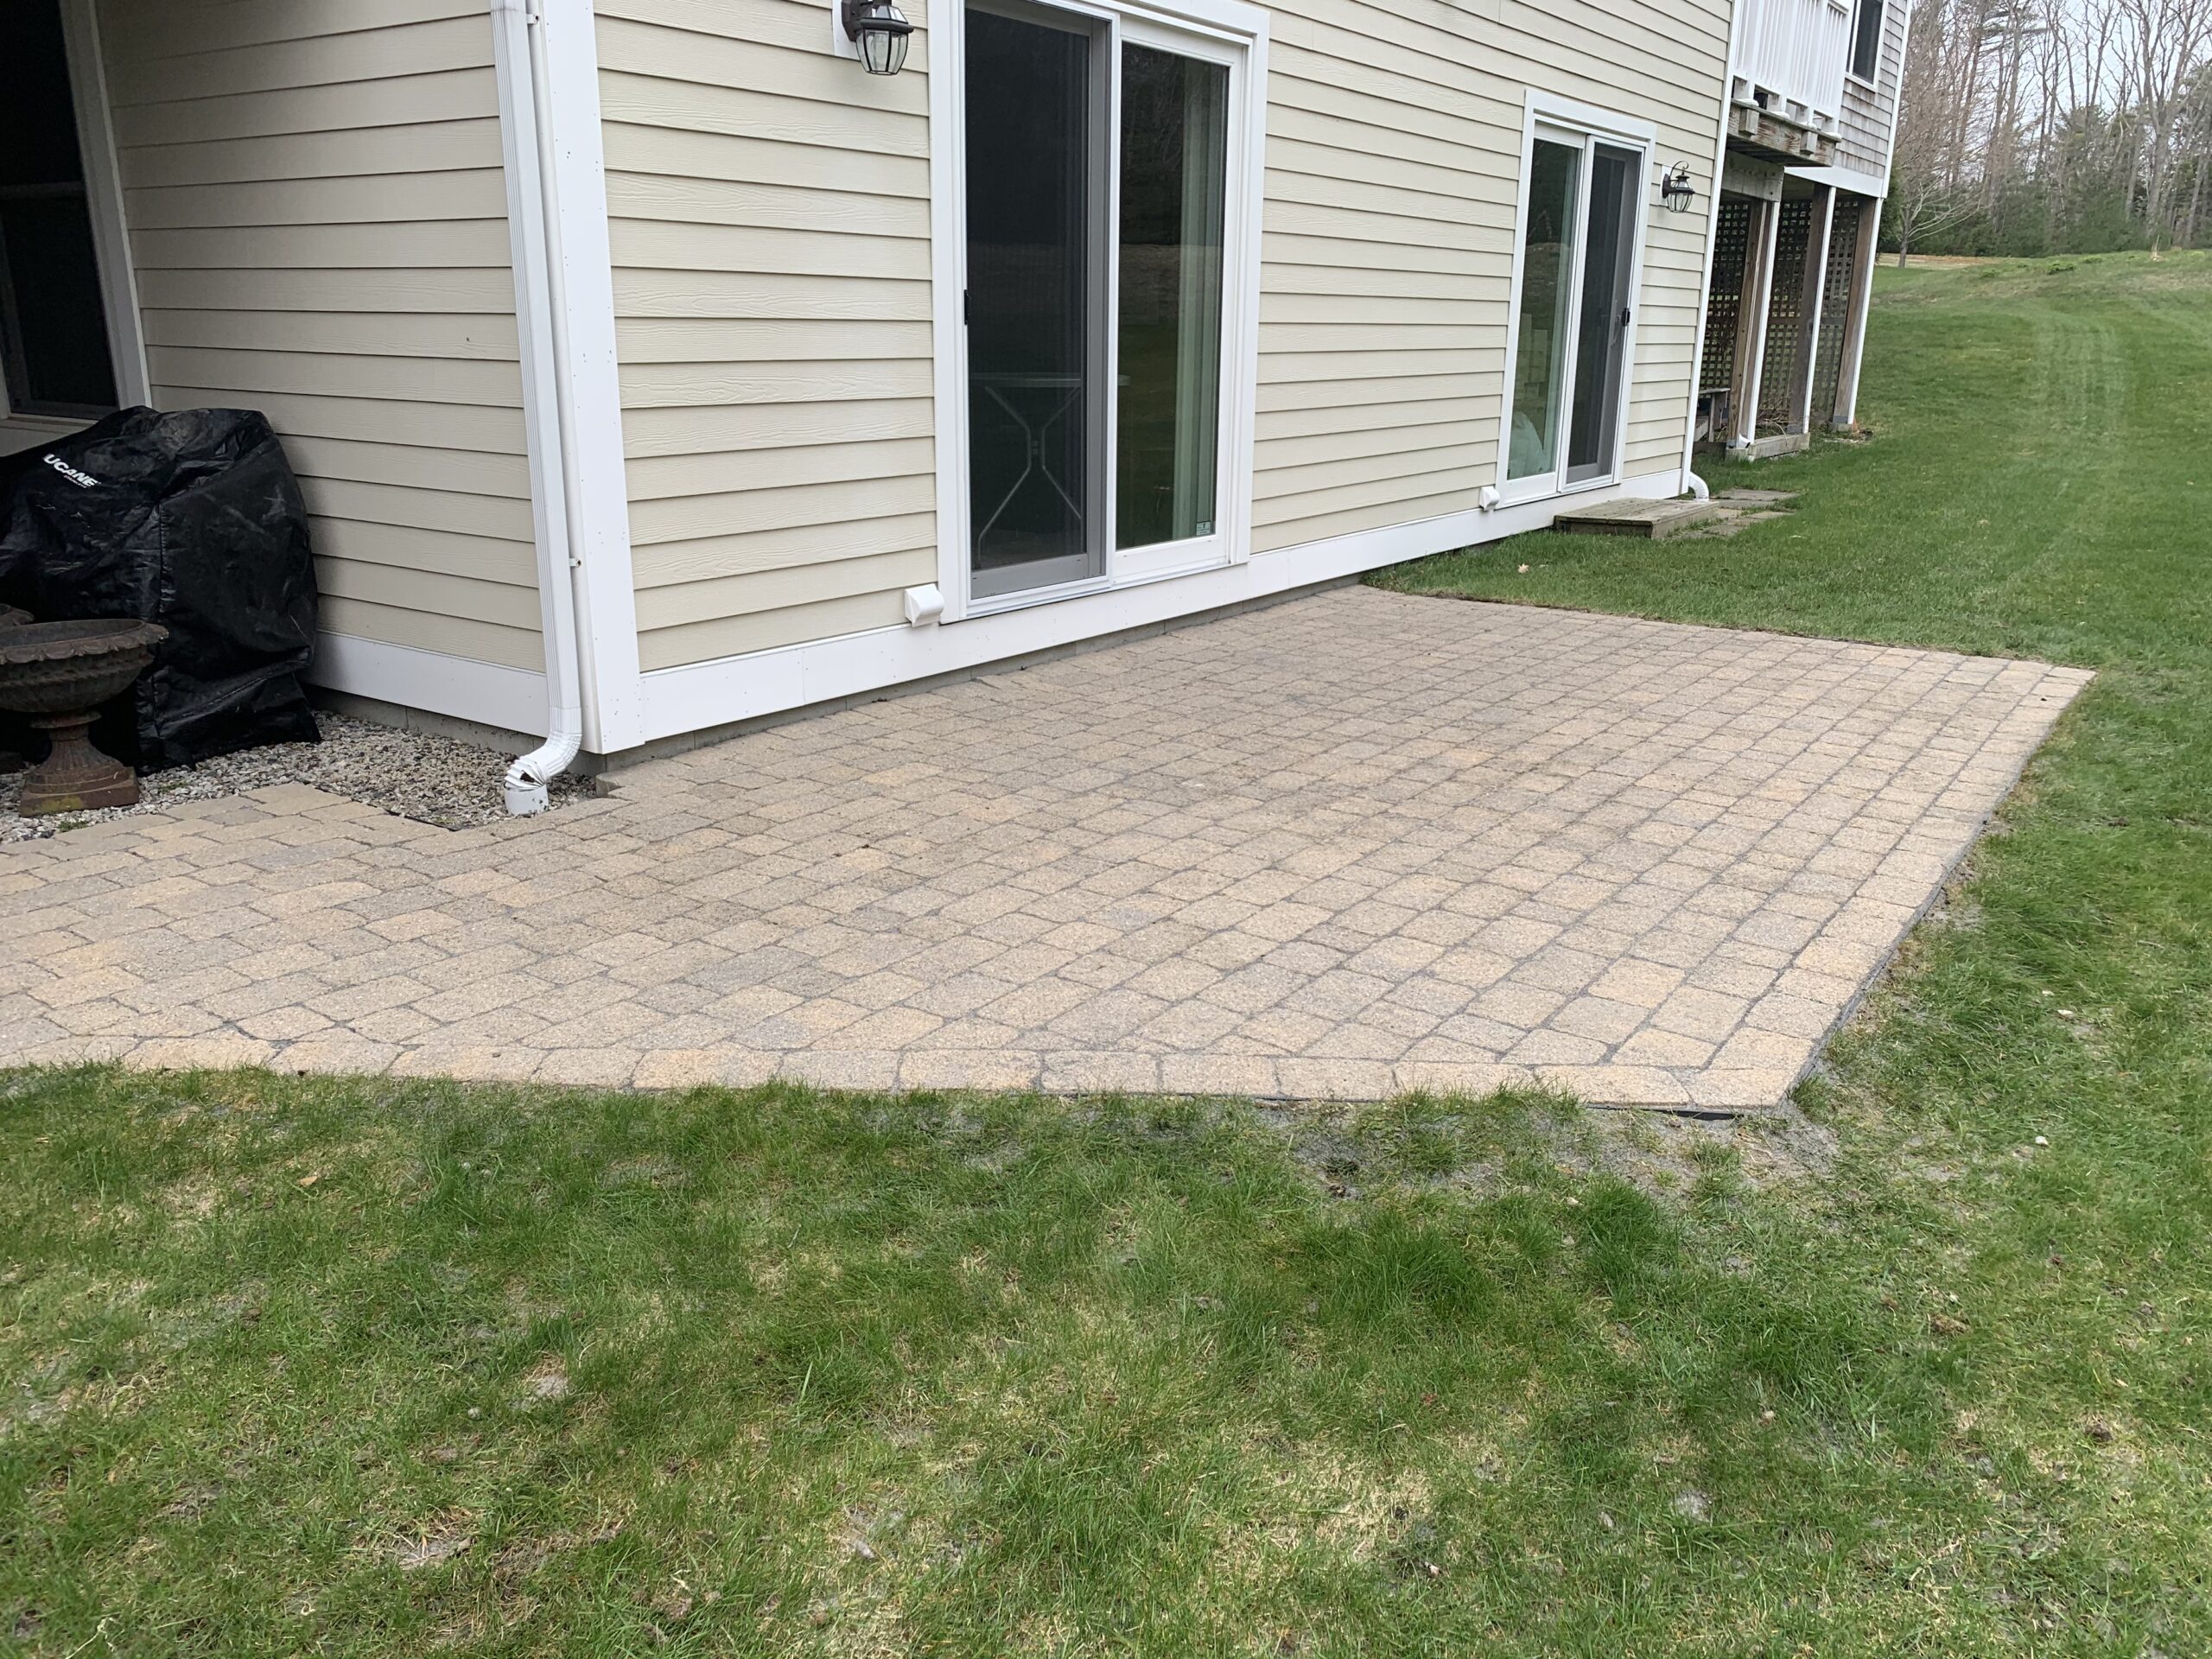 After cleaning, patio stones have been packed with polymeric sand, filling the gaps between paving stones.